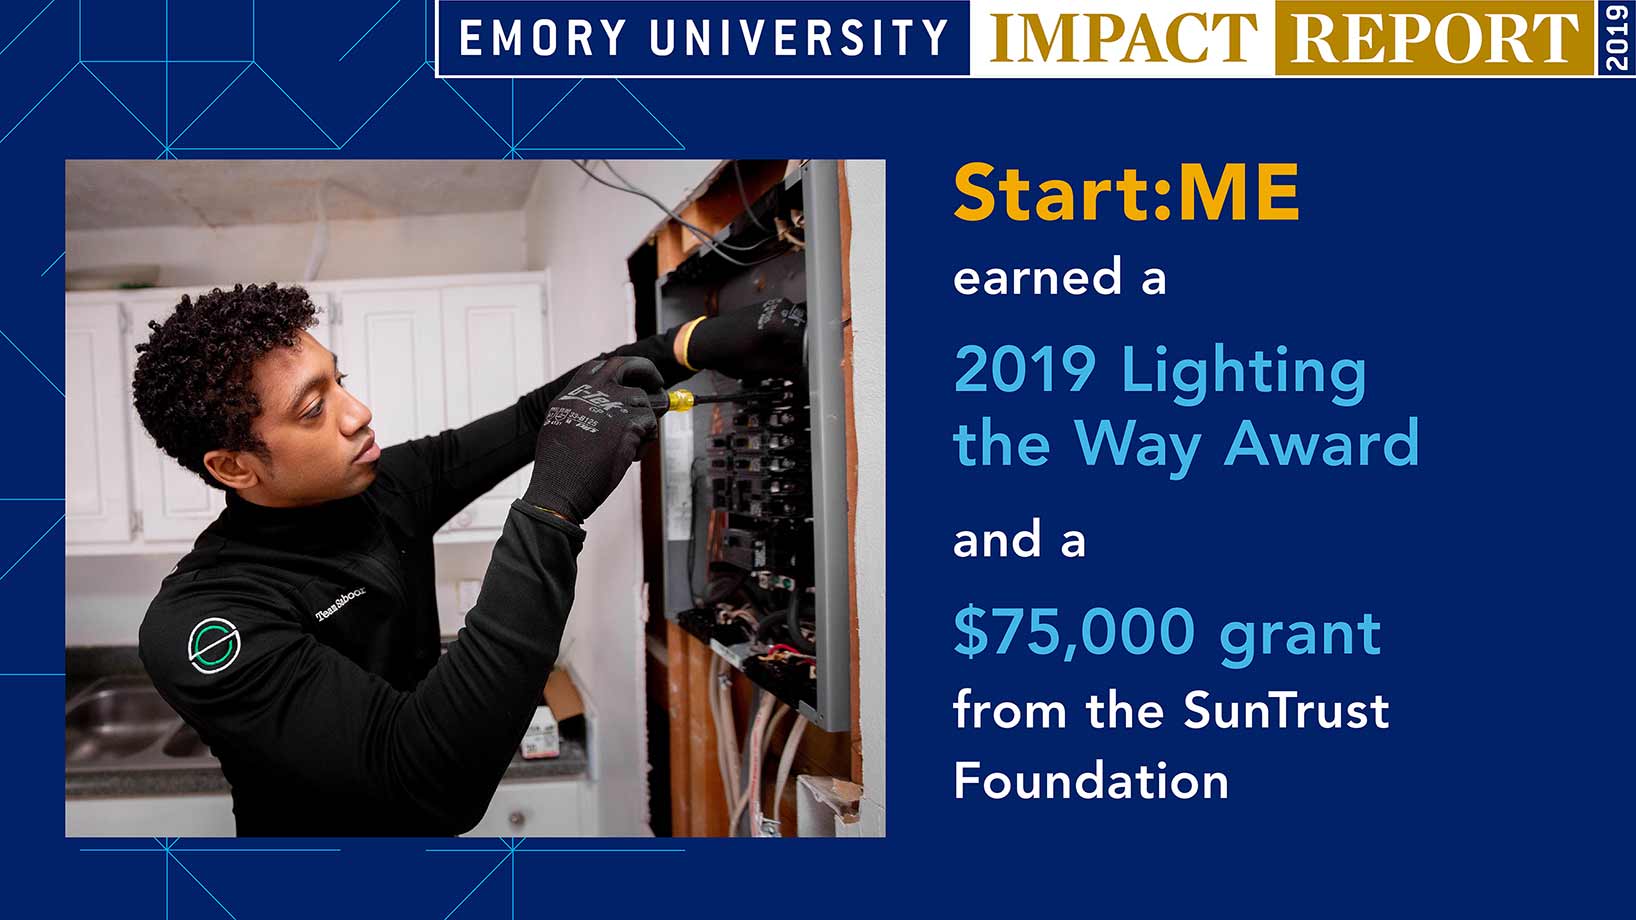 Start:ME earned a 2019 Lighting the Way Award and a $75,000 grant from the SunTrust Foundation